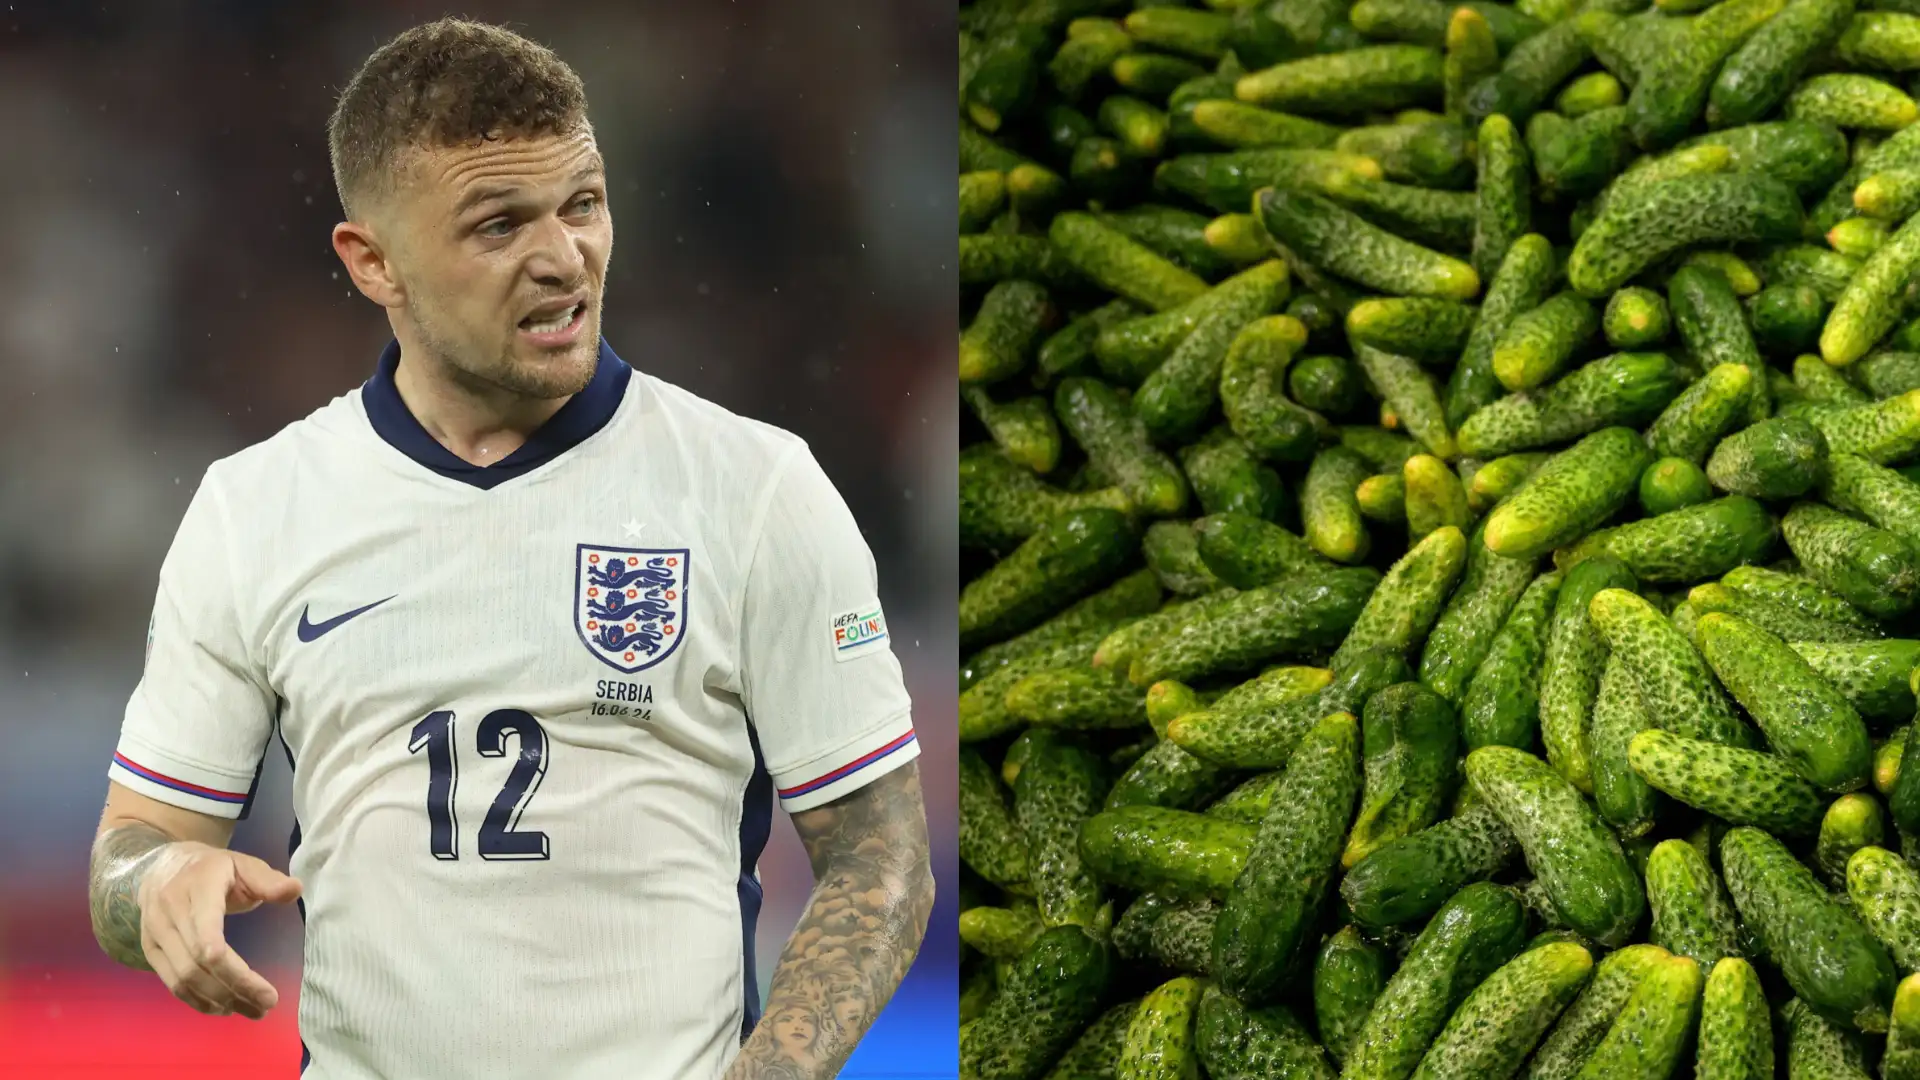 Revealed: Why England squad is taking pickle juice at Euro 2024 with mystery liquid leading to doping allegations